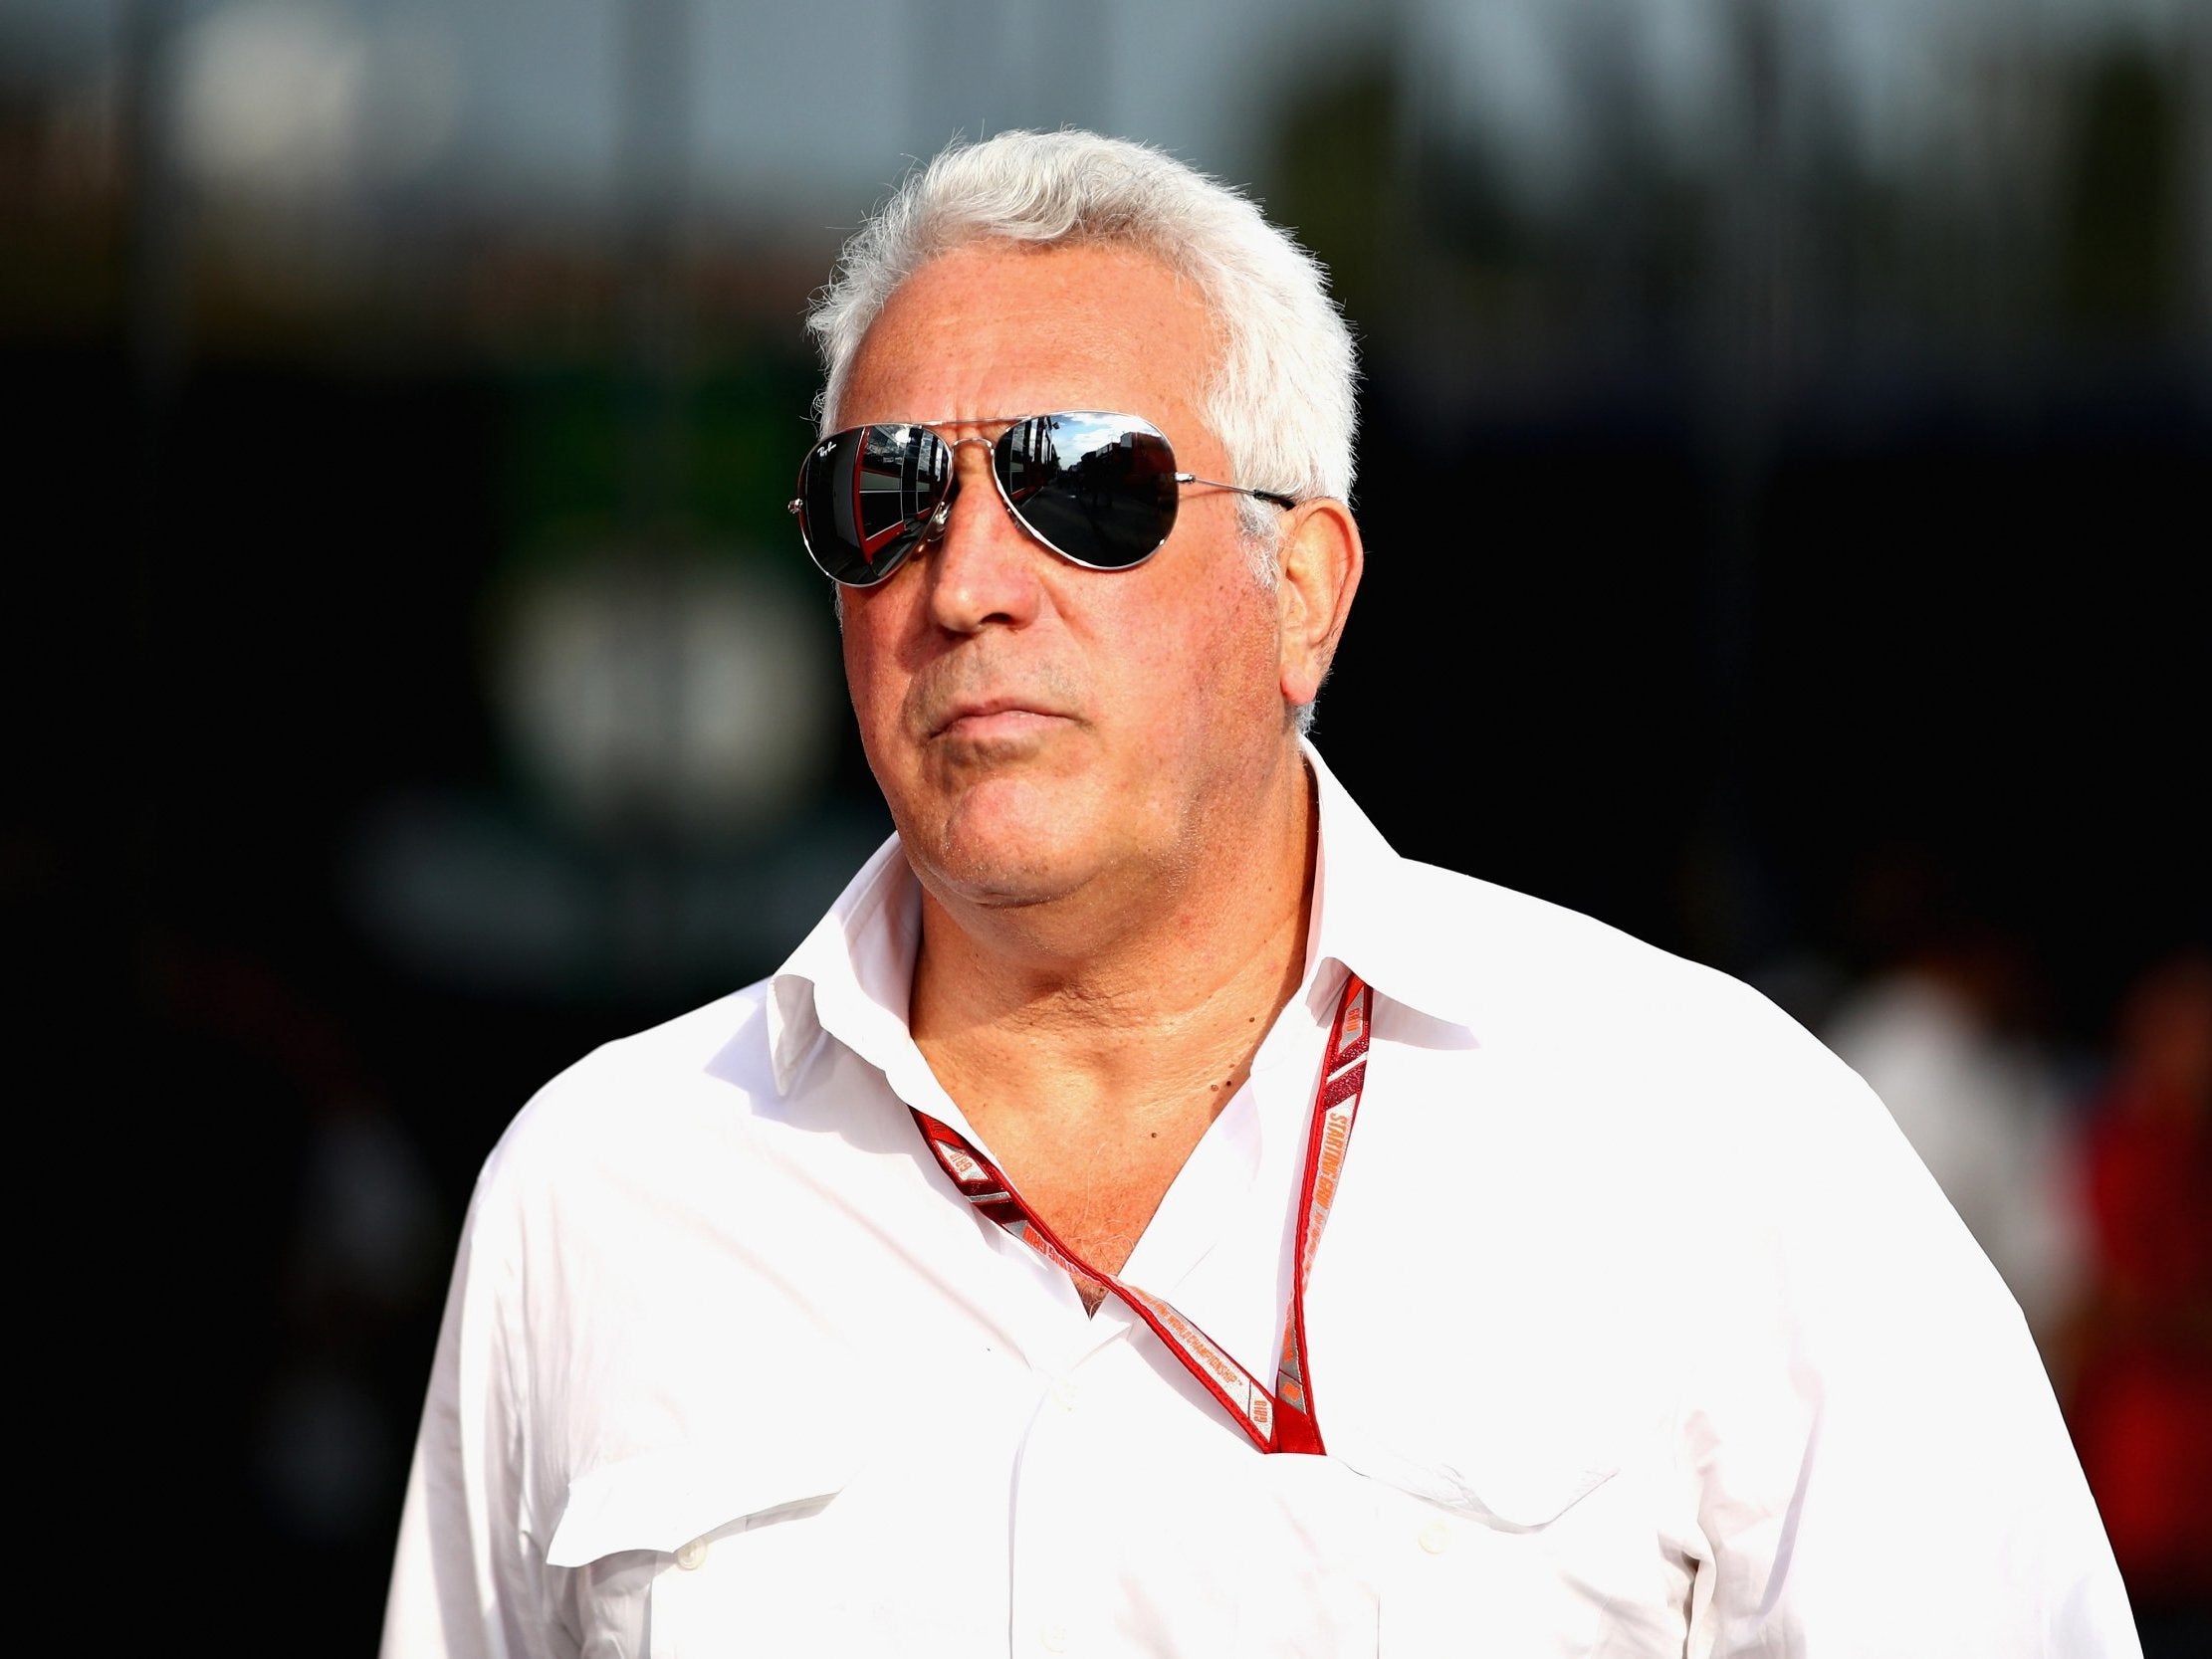 The other men behind the Stroll-led Force India F1 team buyout